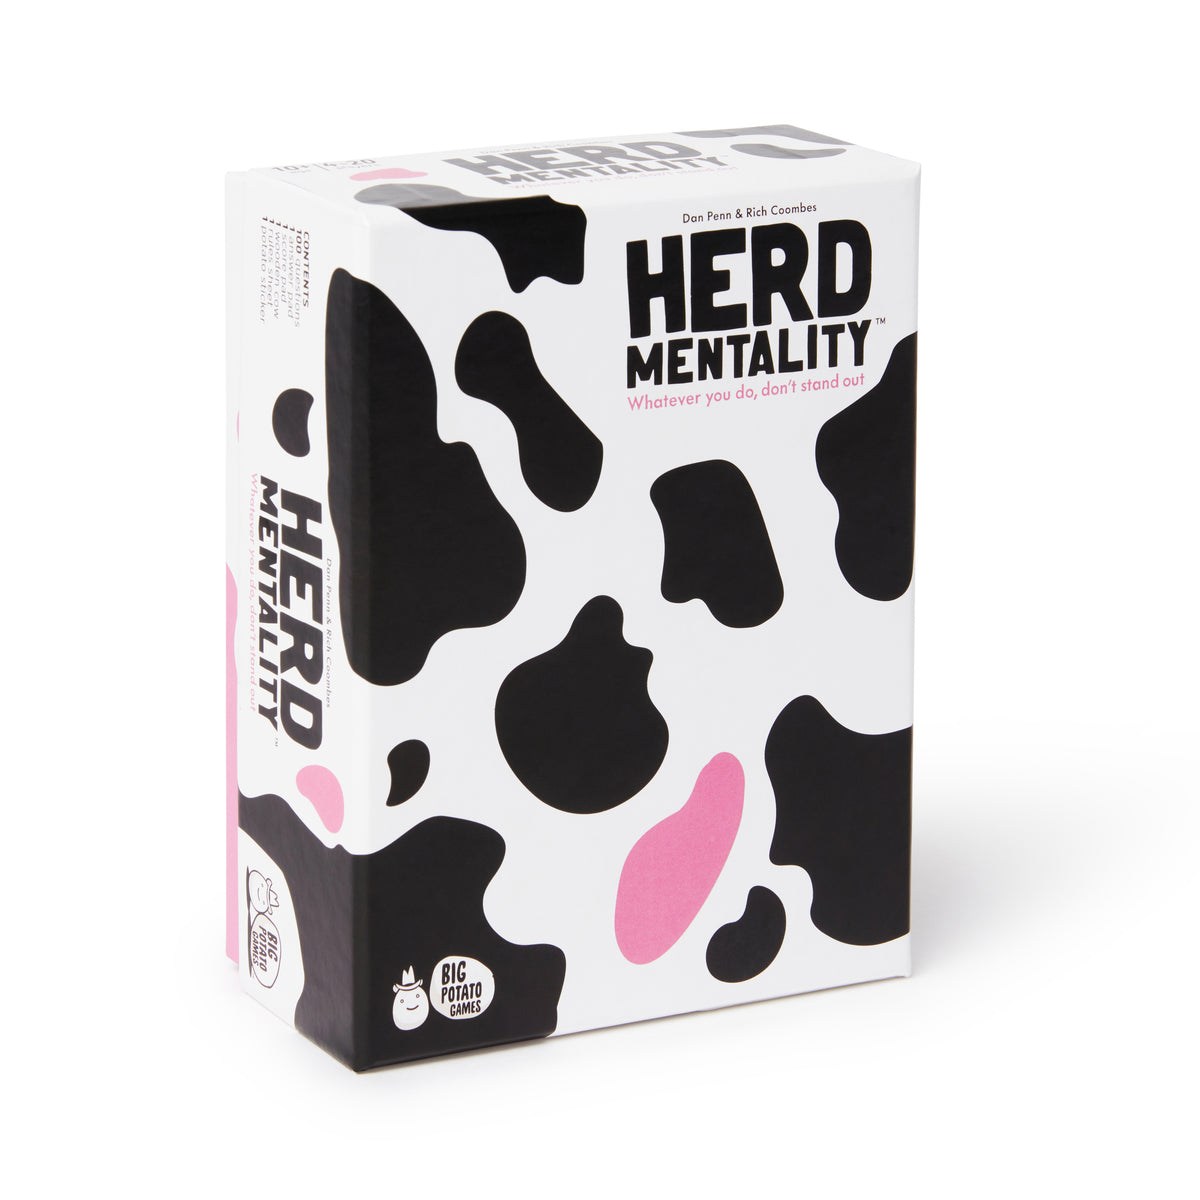 A box covered in black, white and pink cow print. Houses the game Herd Mentality by Big POtato Games